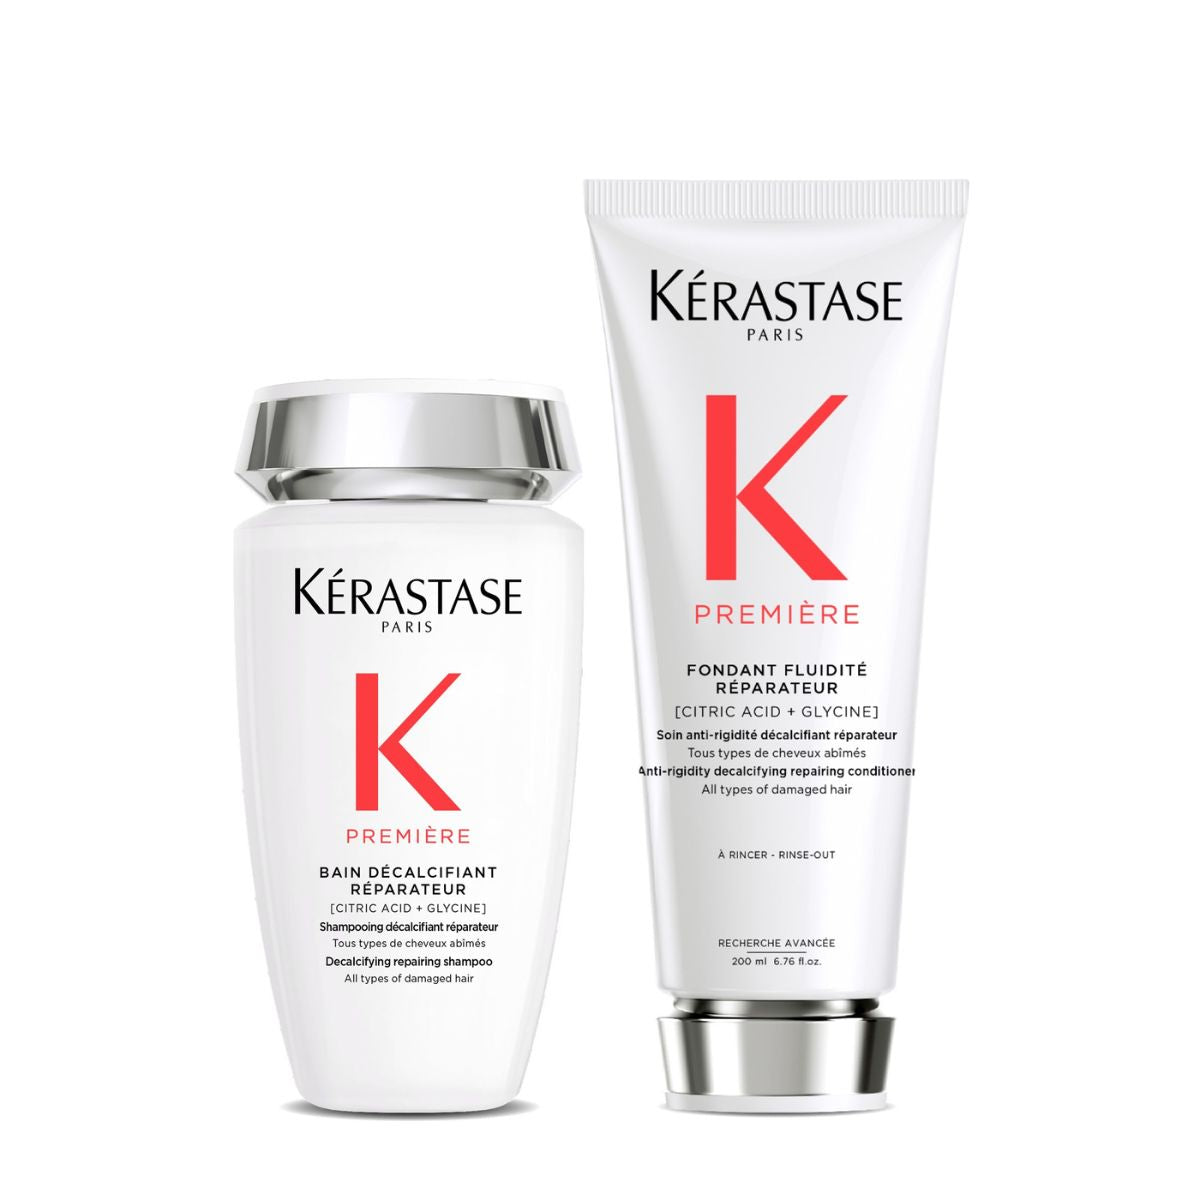 Kérastase Première Decalcifying Repairing Shampoo & Conditioner Duo for Damaged Hair with Pure Citric Acid and Glycine Hair Care